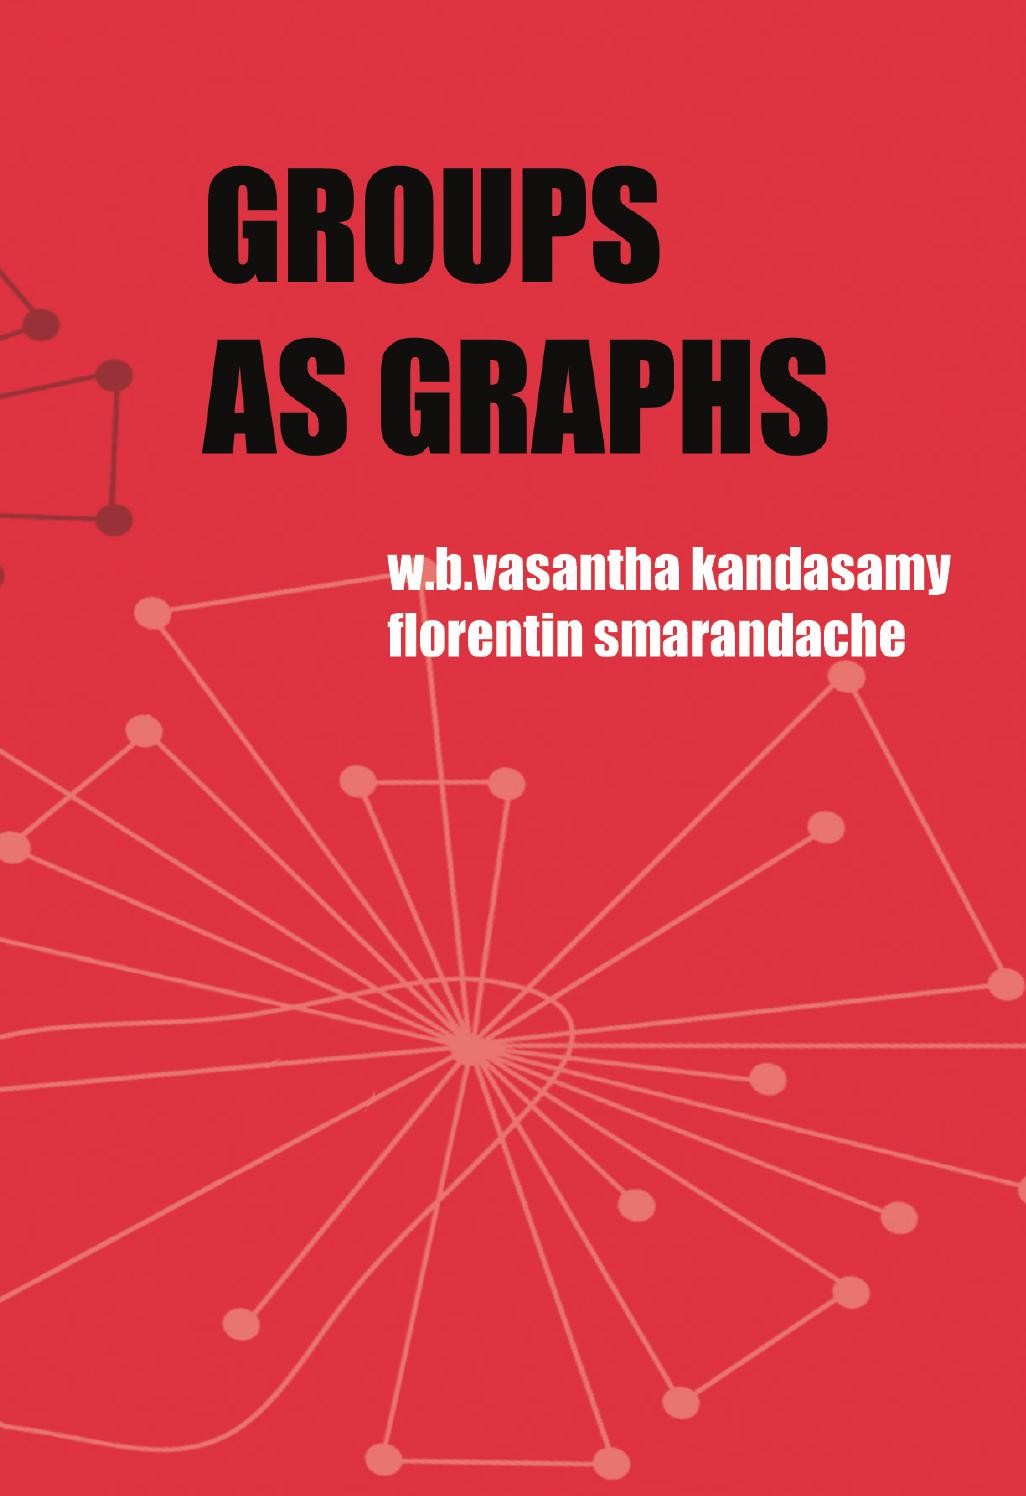 Graphs as Groups